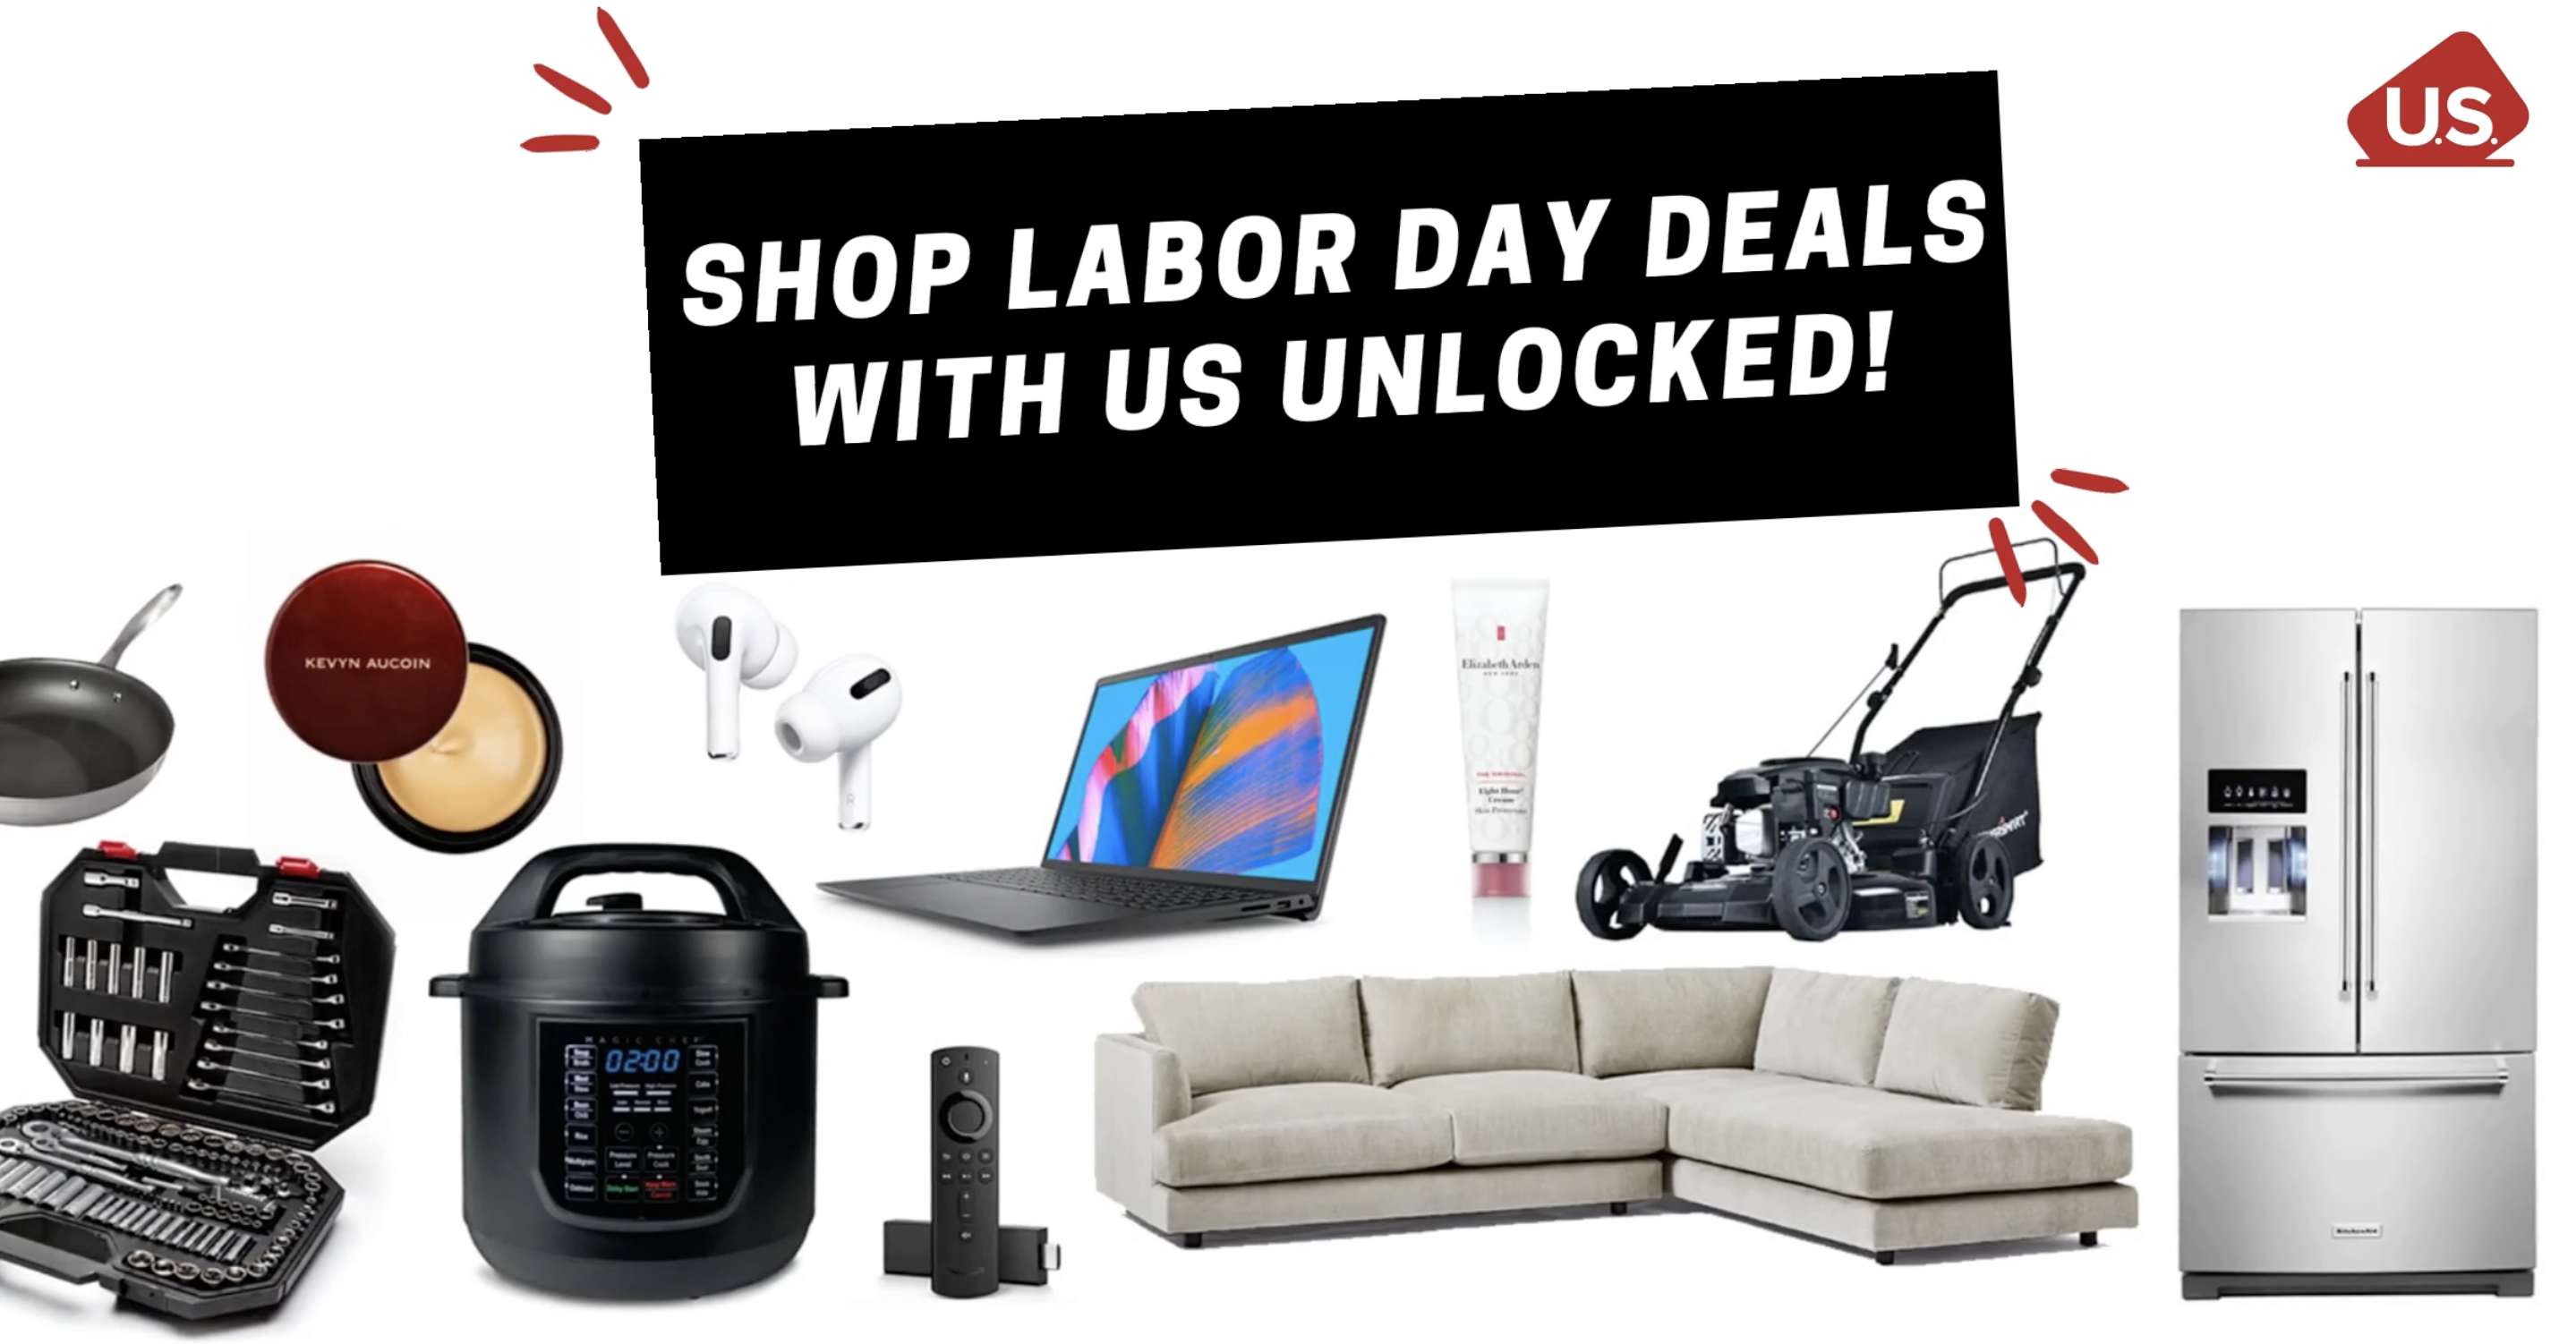 Shop Labor Day Deals with US Unlocked!